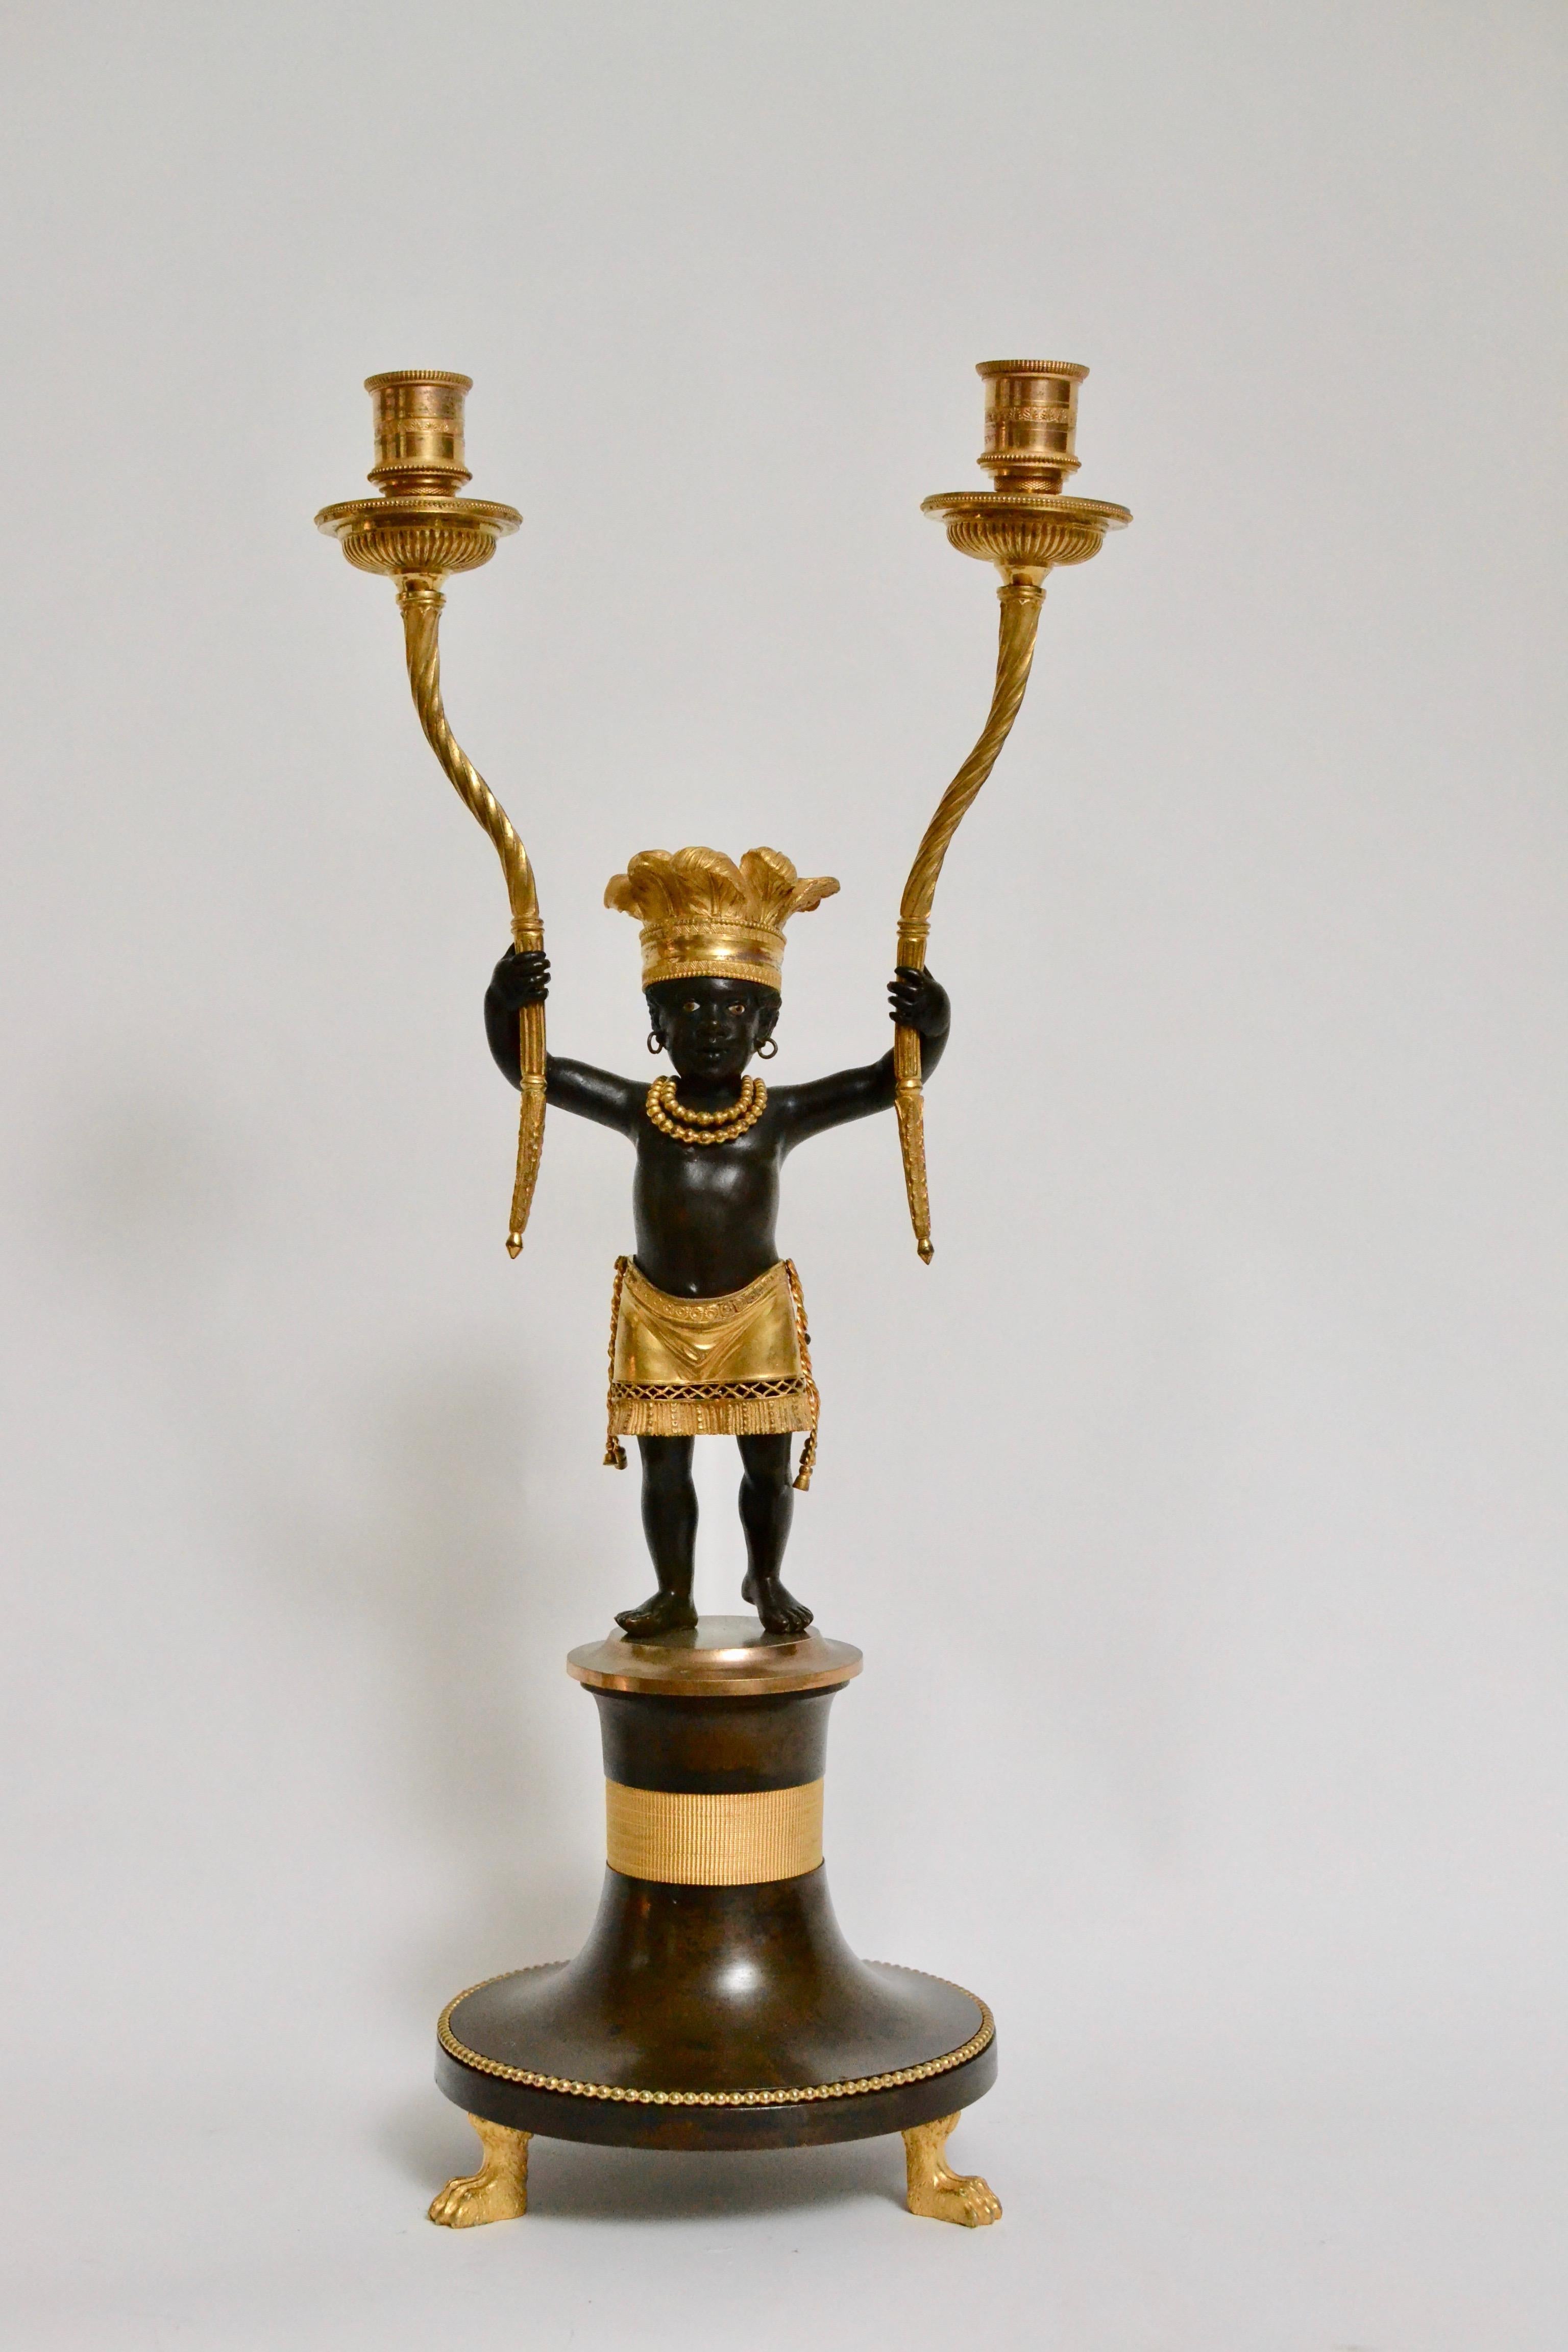 A very rare pair of Directoire à L’Amérique or à l'Indien ormolu and patinated bronze candelabra after a design, circa 1799 by Jean-Simon Deverberie (1764-1824). An Identical pair is in the Museum François Duesberg. The bronze figures with enameled